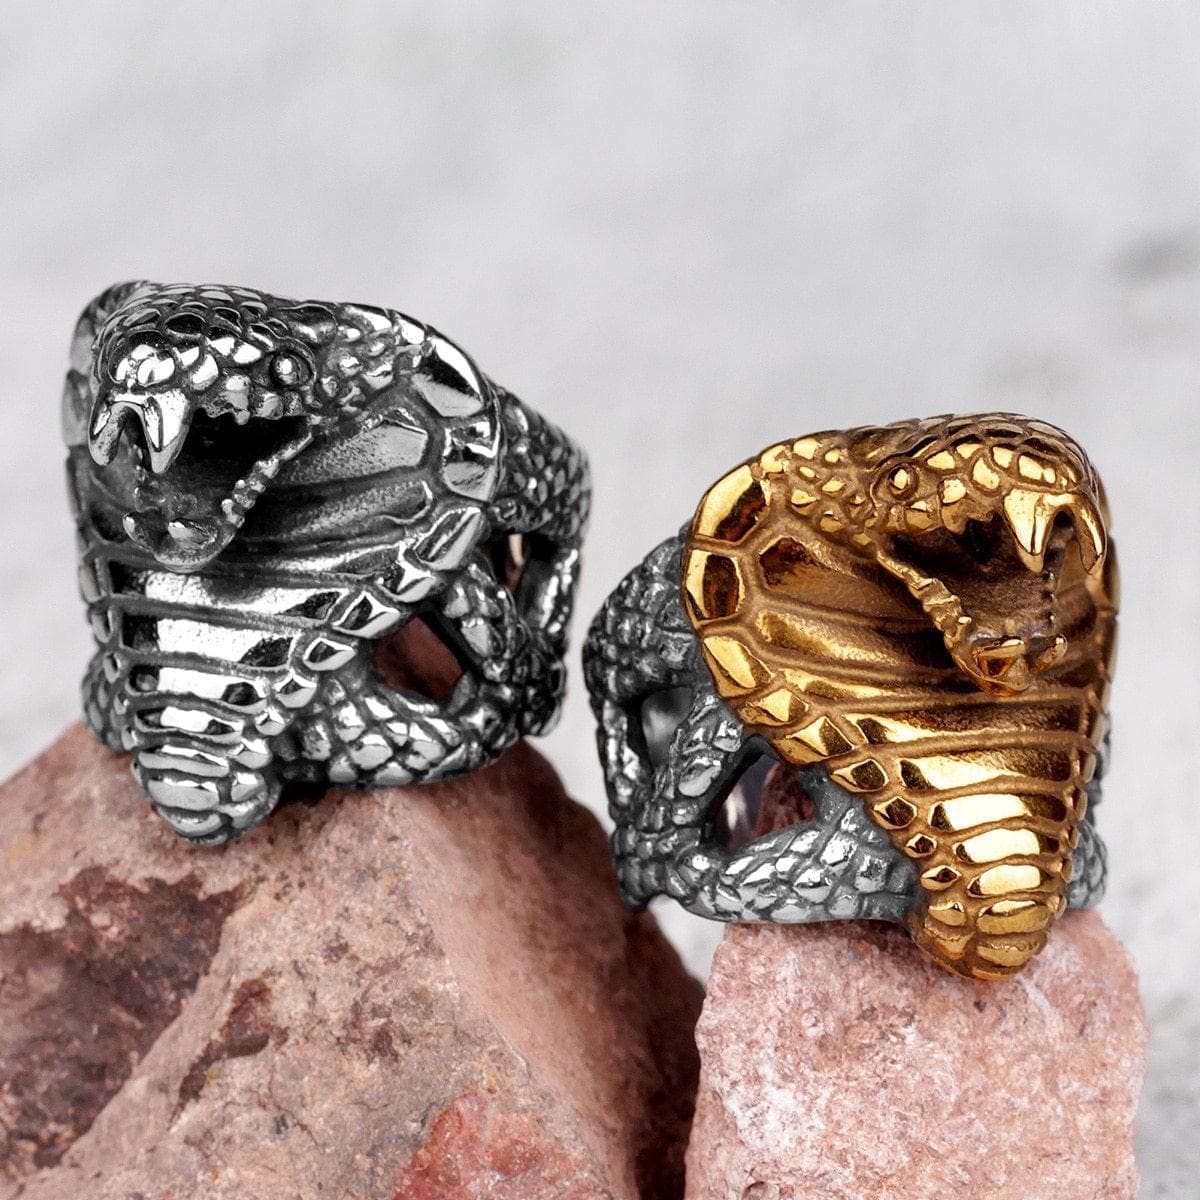 Rings Stainless Steel Men Rings Cobra Snake Animal Punk Rock Personality for Biker Male Boyfriend Jewelry Creativity Gift Wholesale|Rings| Ancient Treasures Ancientreasures Viking Odin Thor Mjolnir Celtic Ancient Egypt Norse Norse Mythology